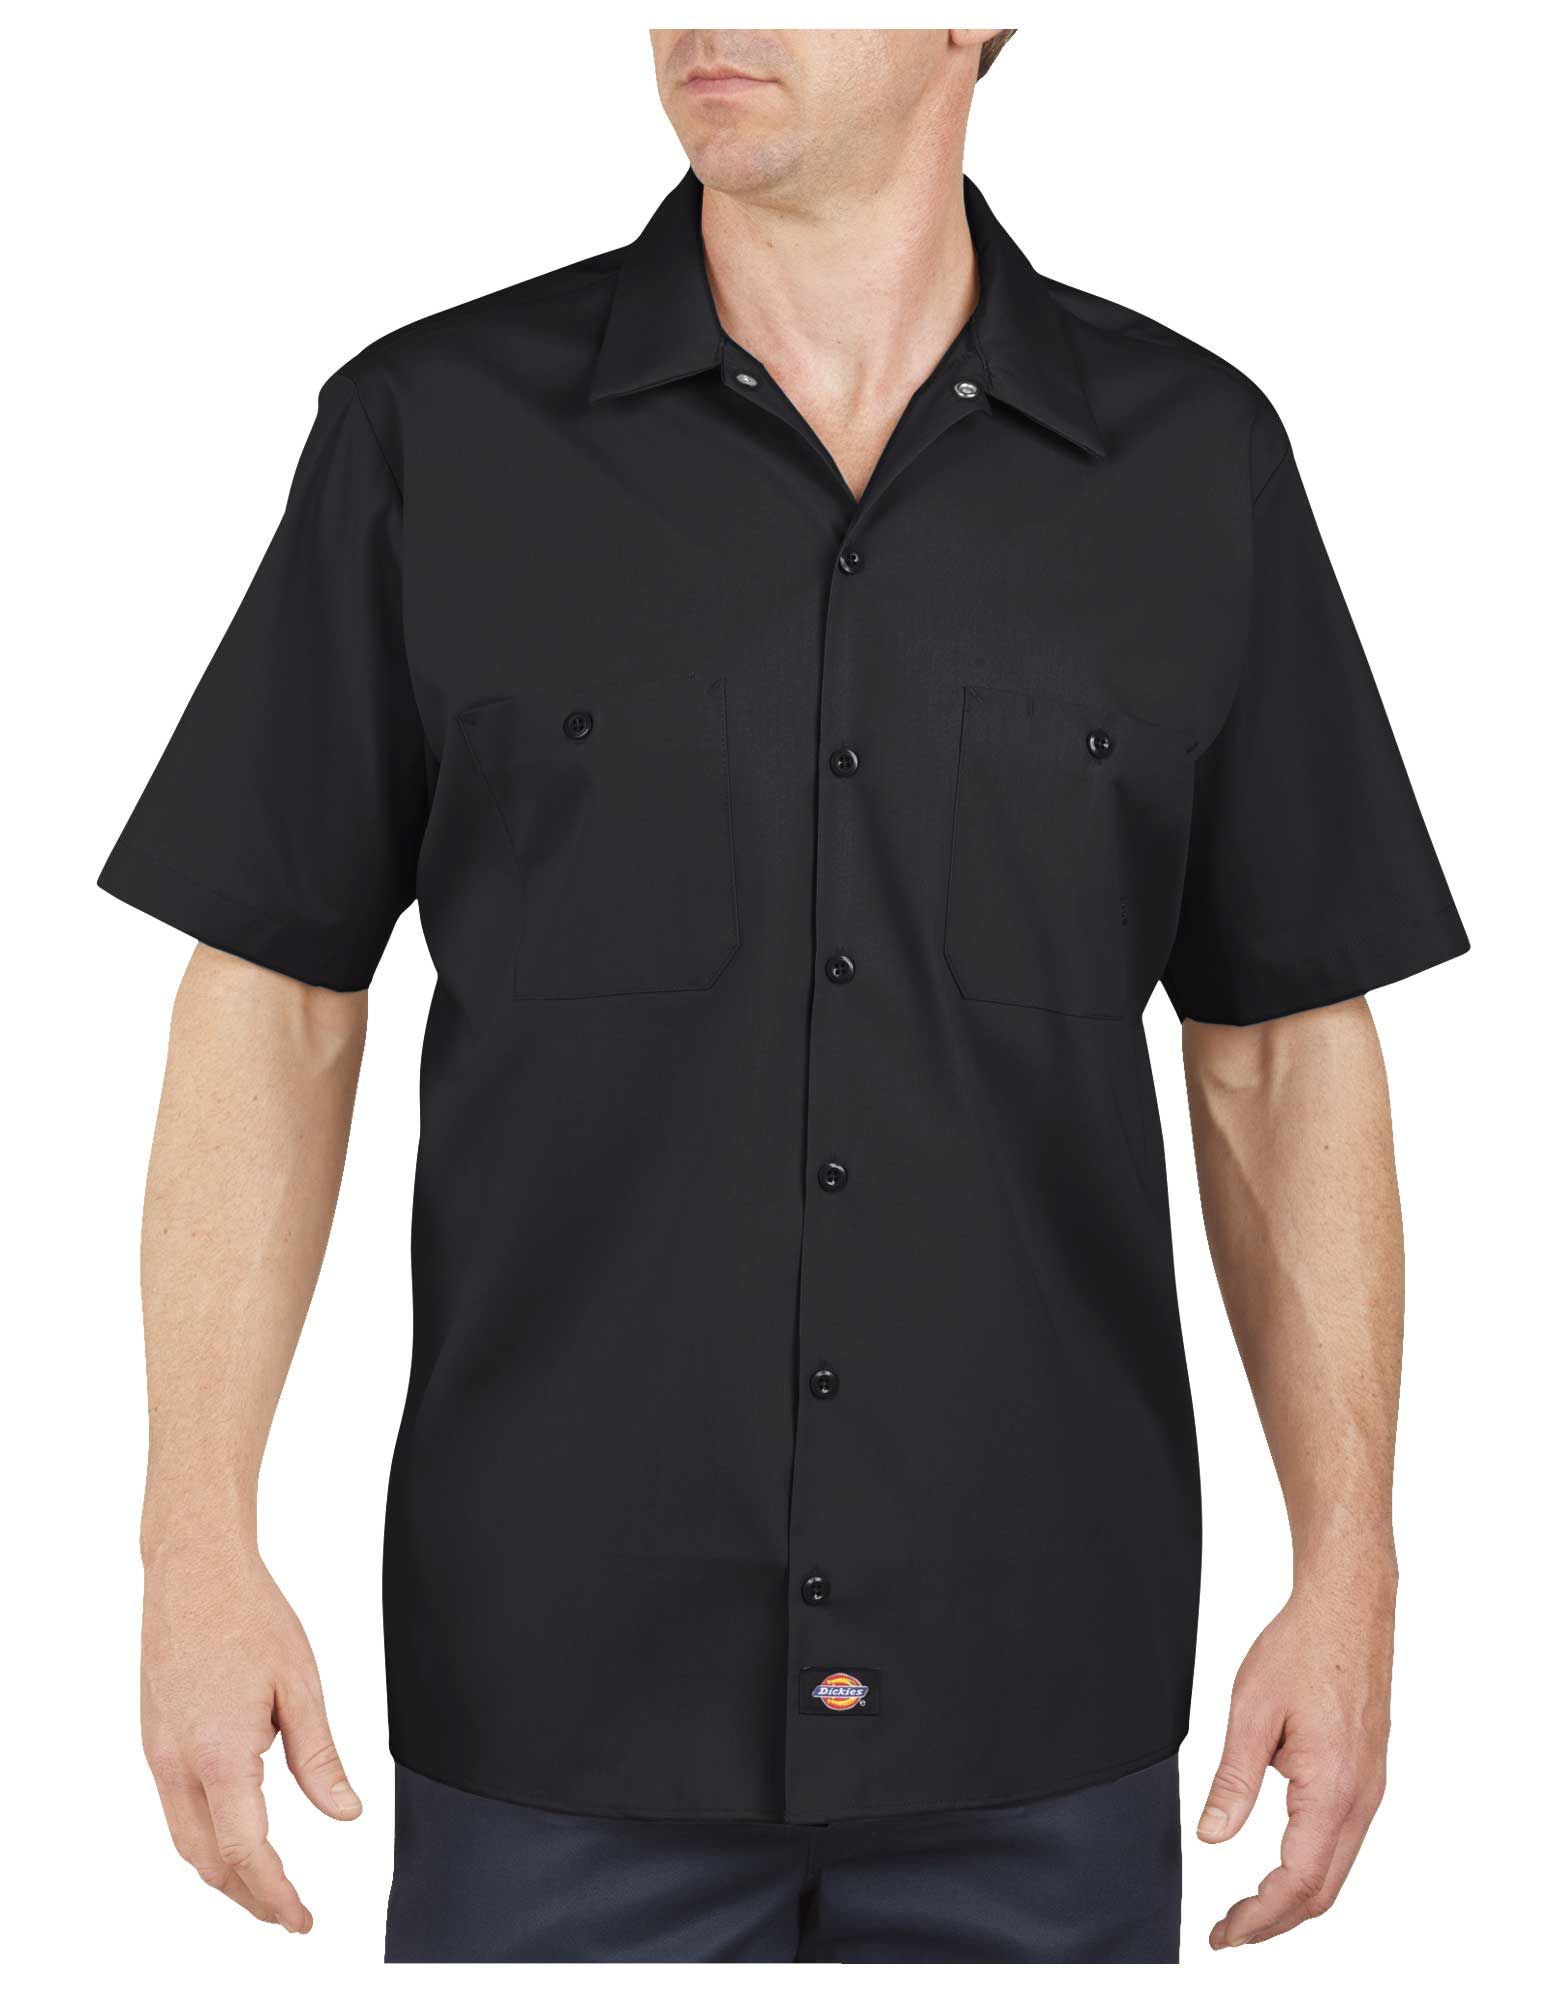 Home Men Shirts Industrial Short Sleeve Work Shirt Click to view video ...